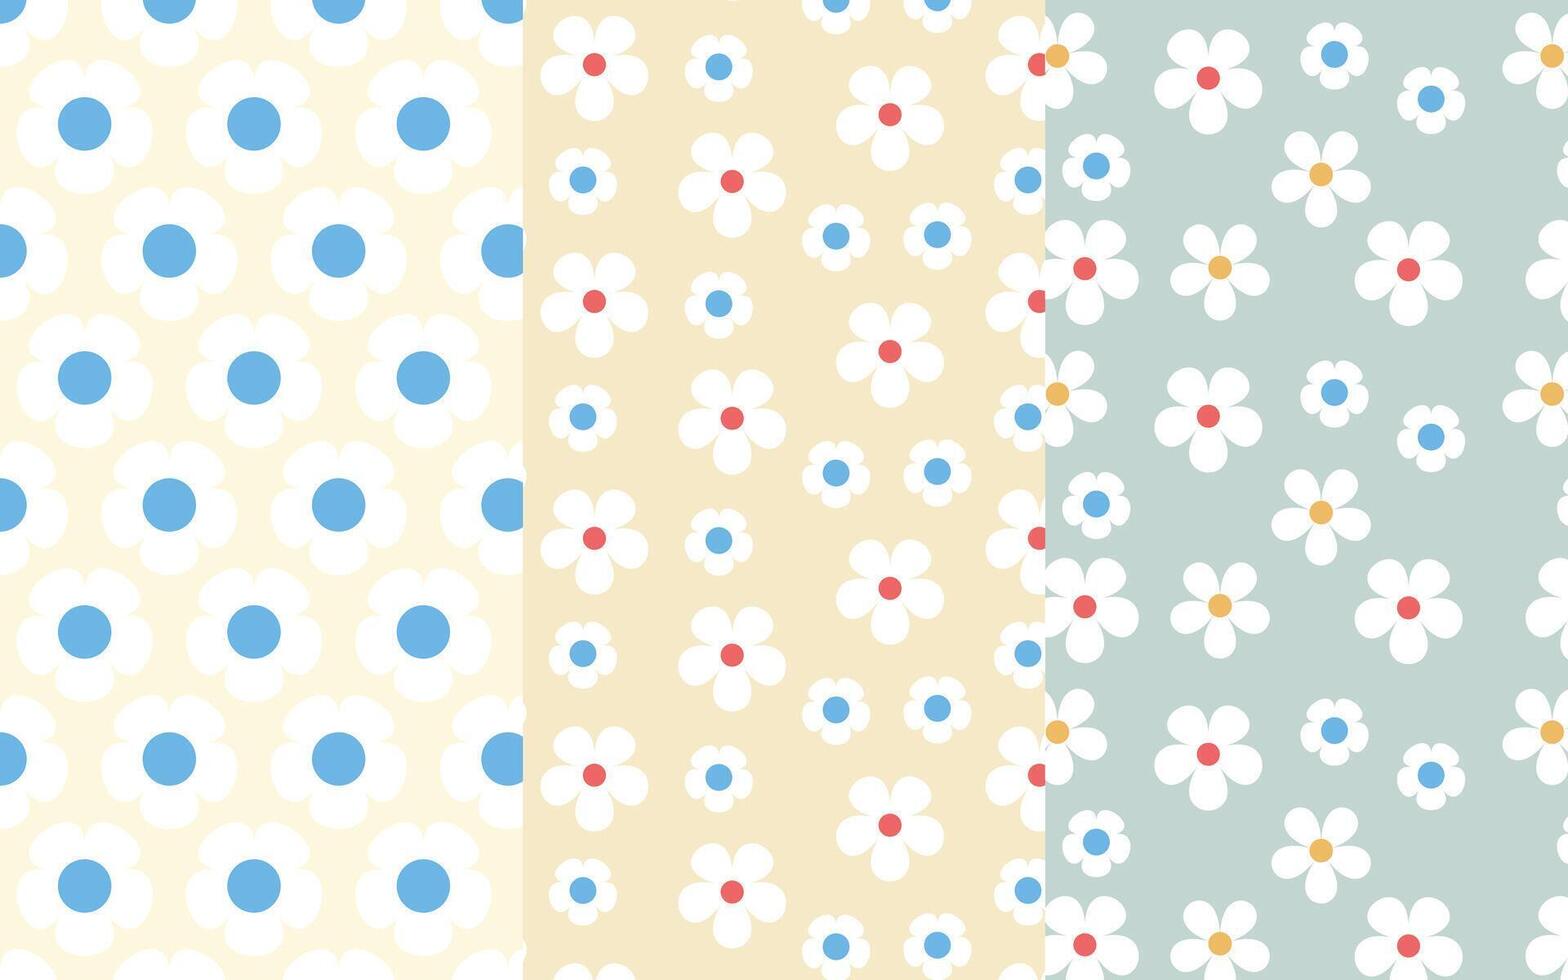 patterns with daisy flower, 3 kind flowers backgrounds vector illustration. Cute summer wallpaper.